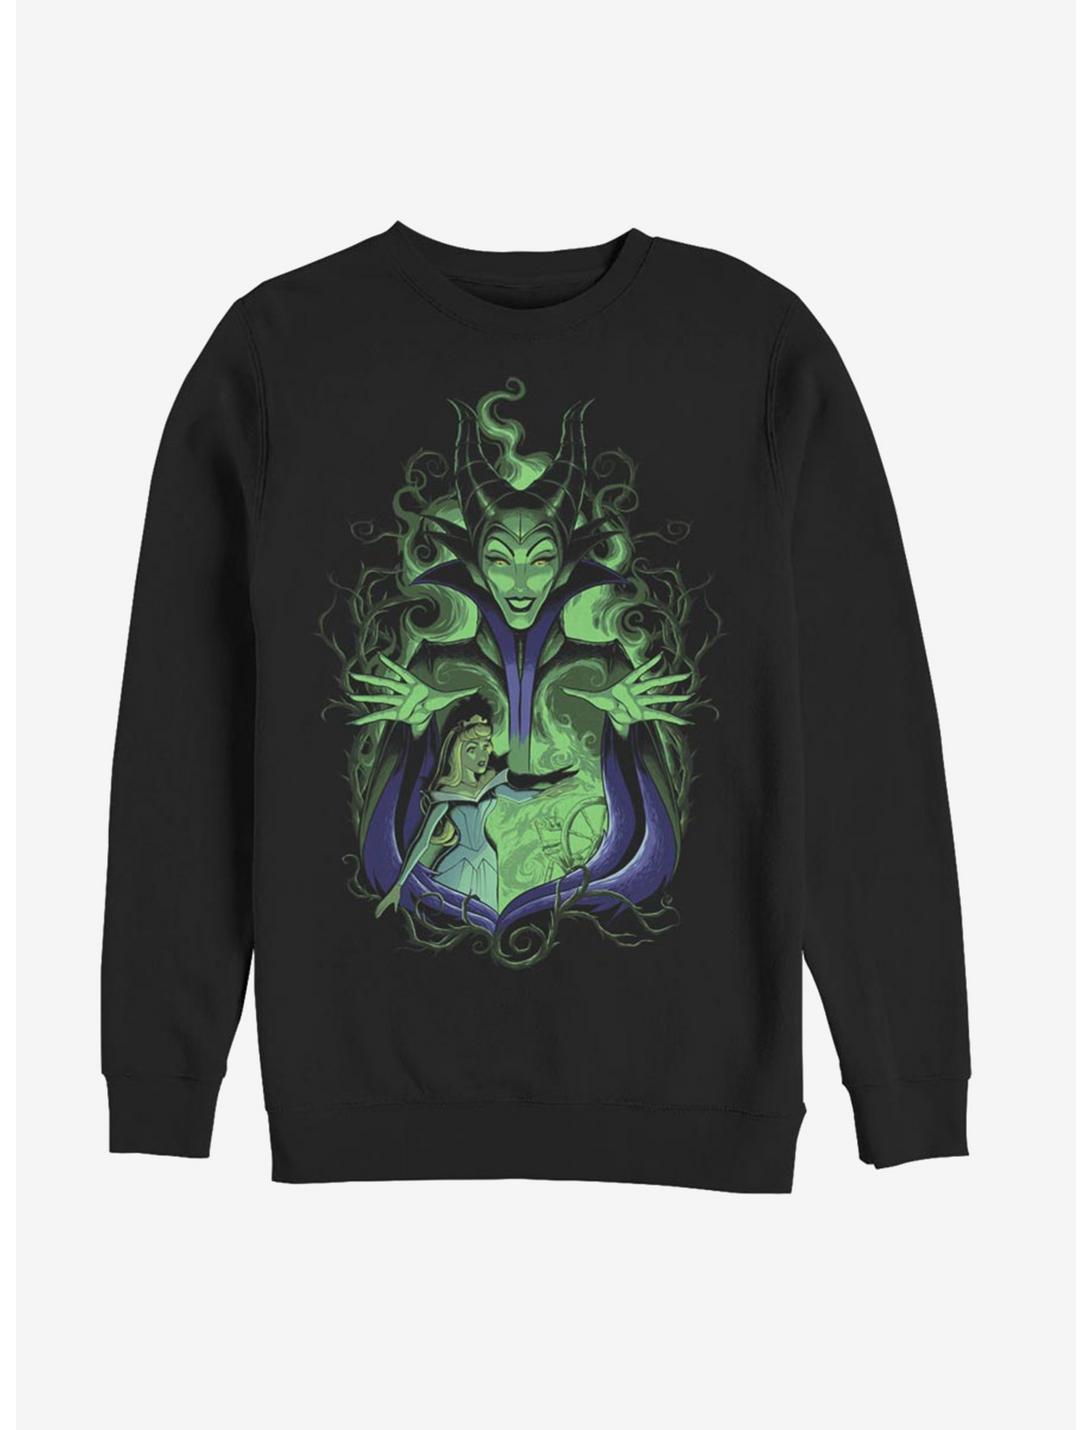 Disney Sleeping Beauty Maleficent Touch The Spindle Sweatshirt, BLACK, hi-res